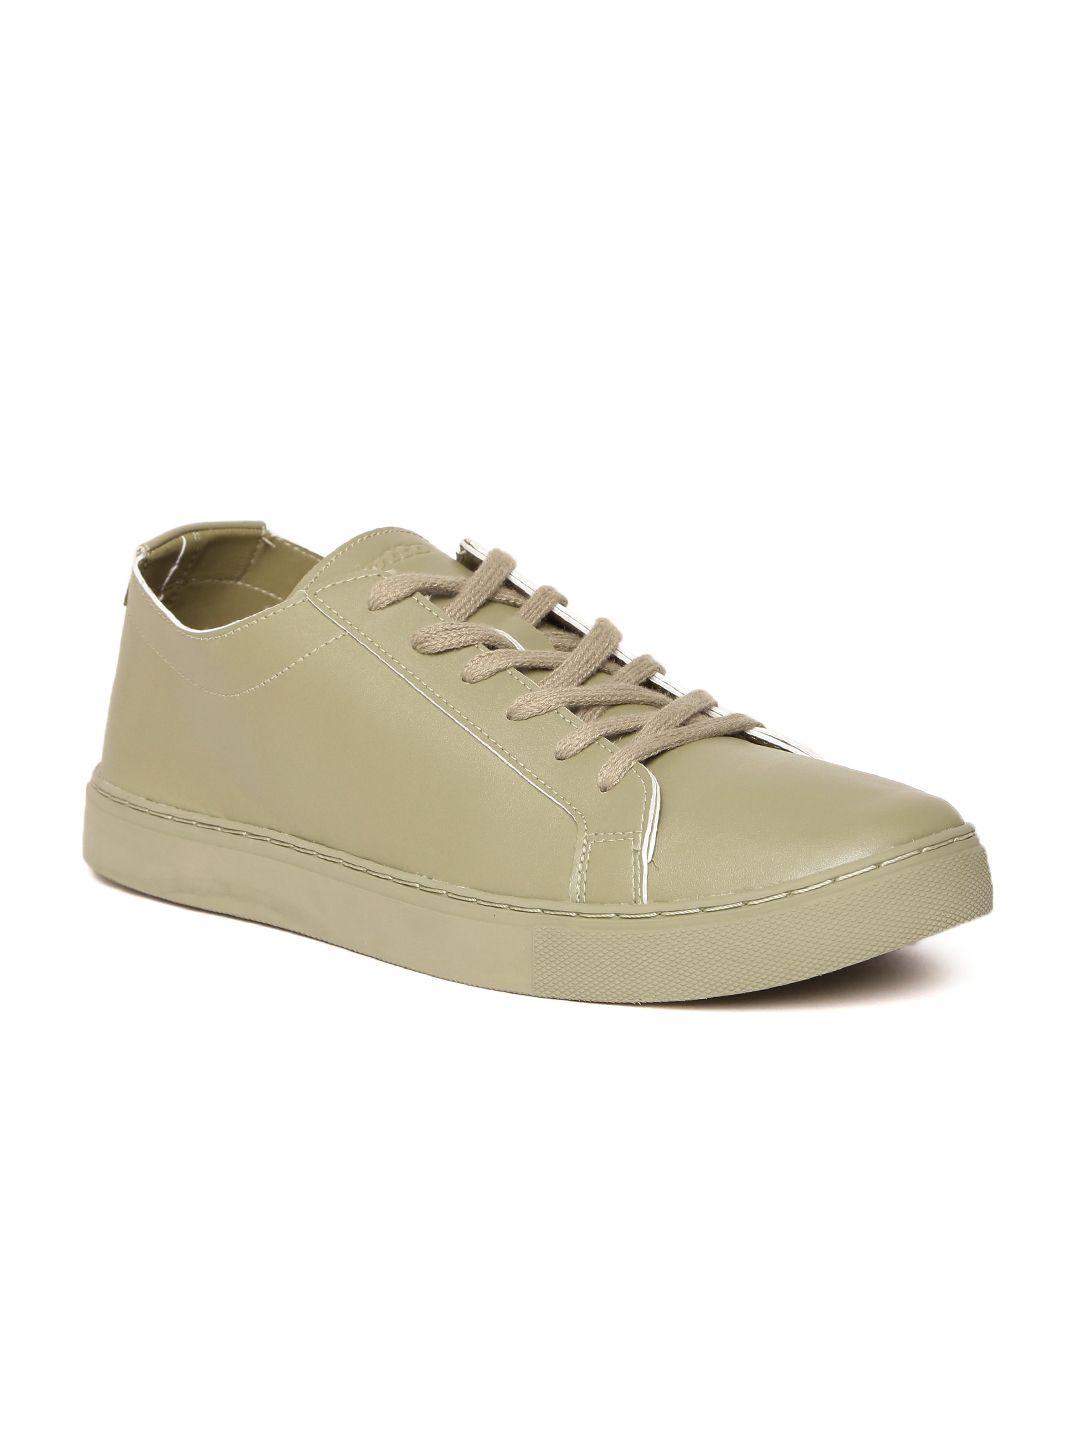 Lotto Men Olive Green Sneakers